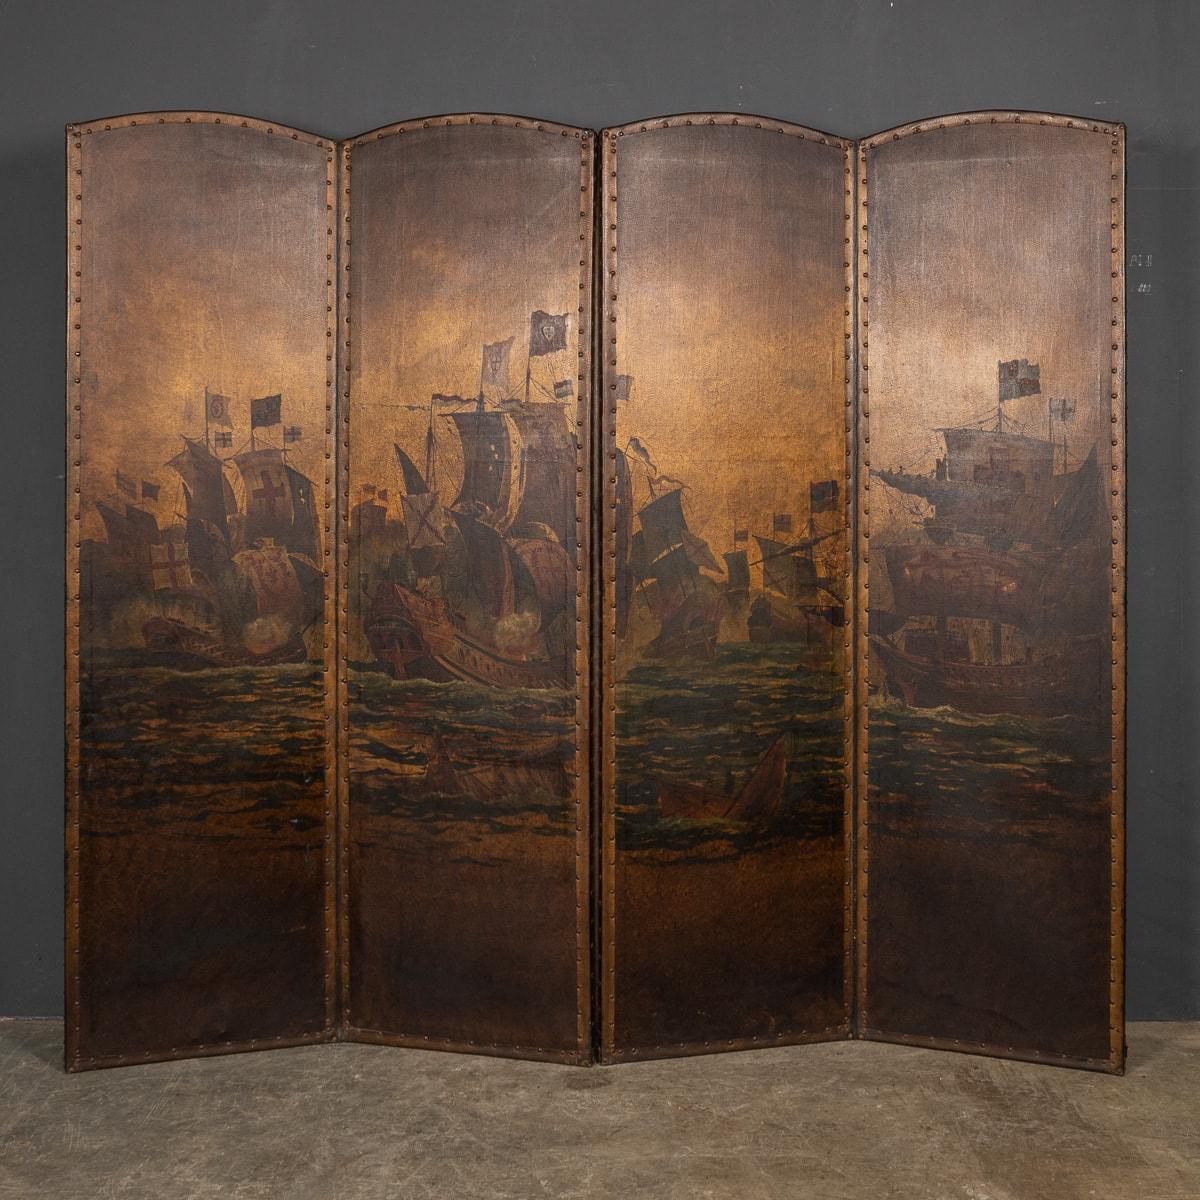 Antique 20th Century beautifully painted four panel dress screen depicting 17th Century battleships at sea. Painted oil on leather, each panel is finished with a studded edge. 

CONDITION
In Good Condition - Some wear consistent with normal use,